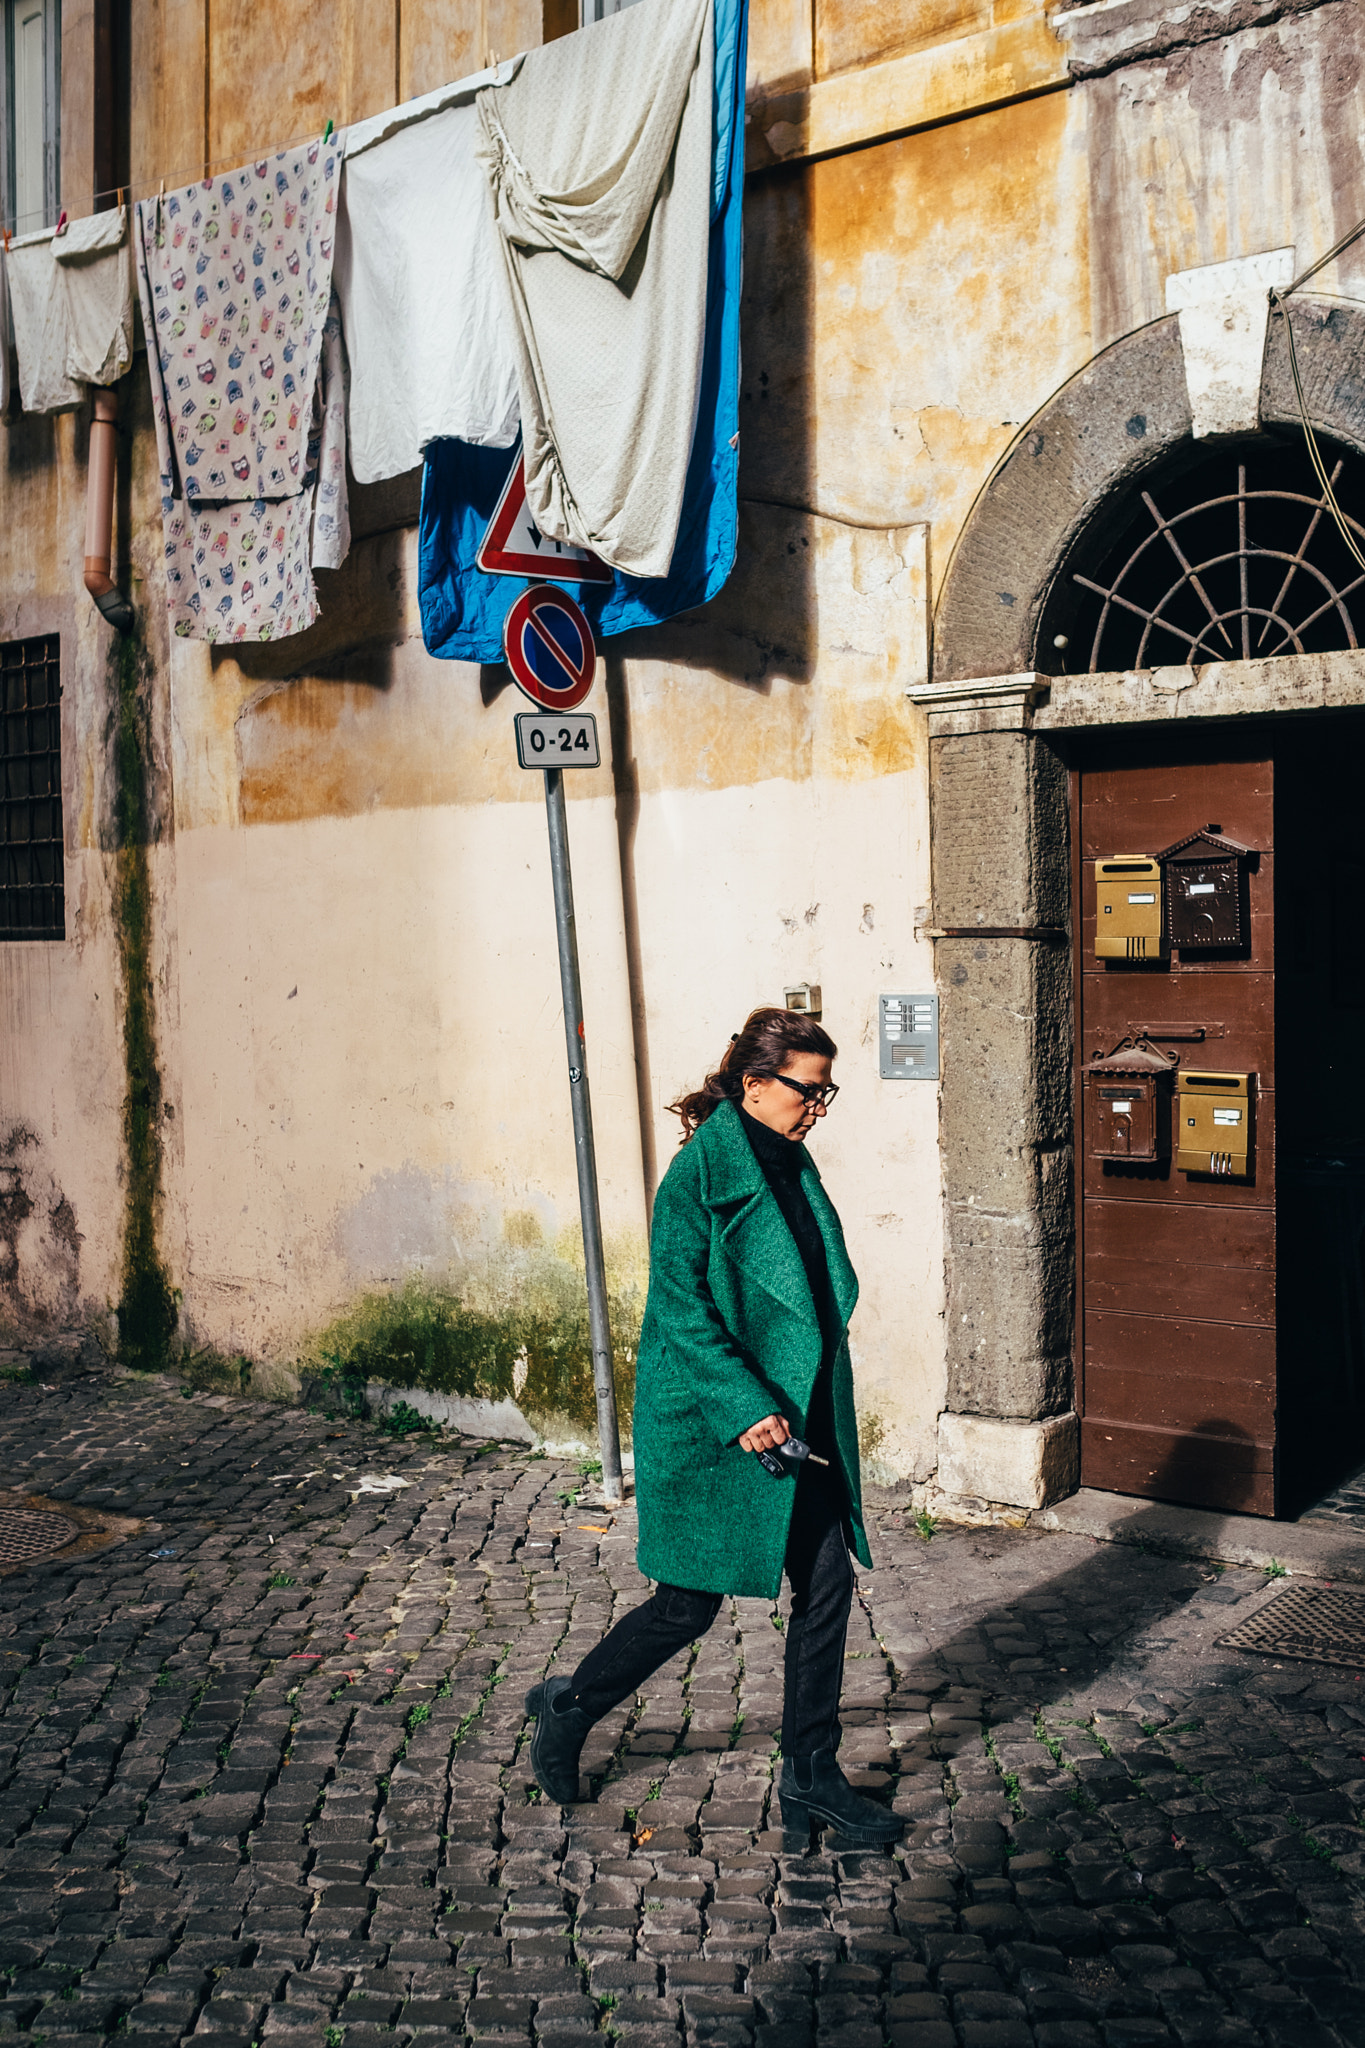 Fujifilm X-T1 sample photo. Laundry drying on a sunny winter day in rome photography